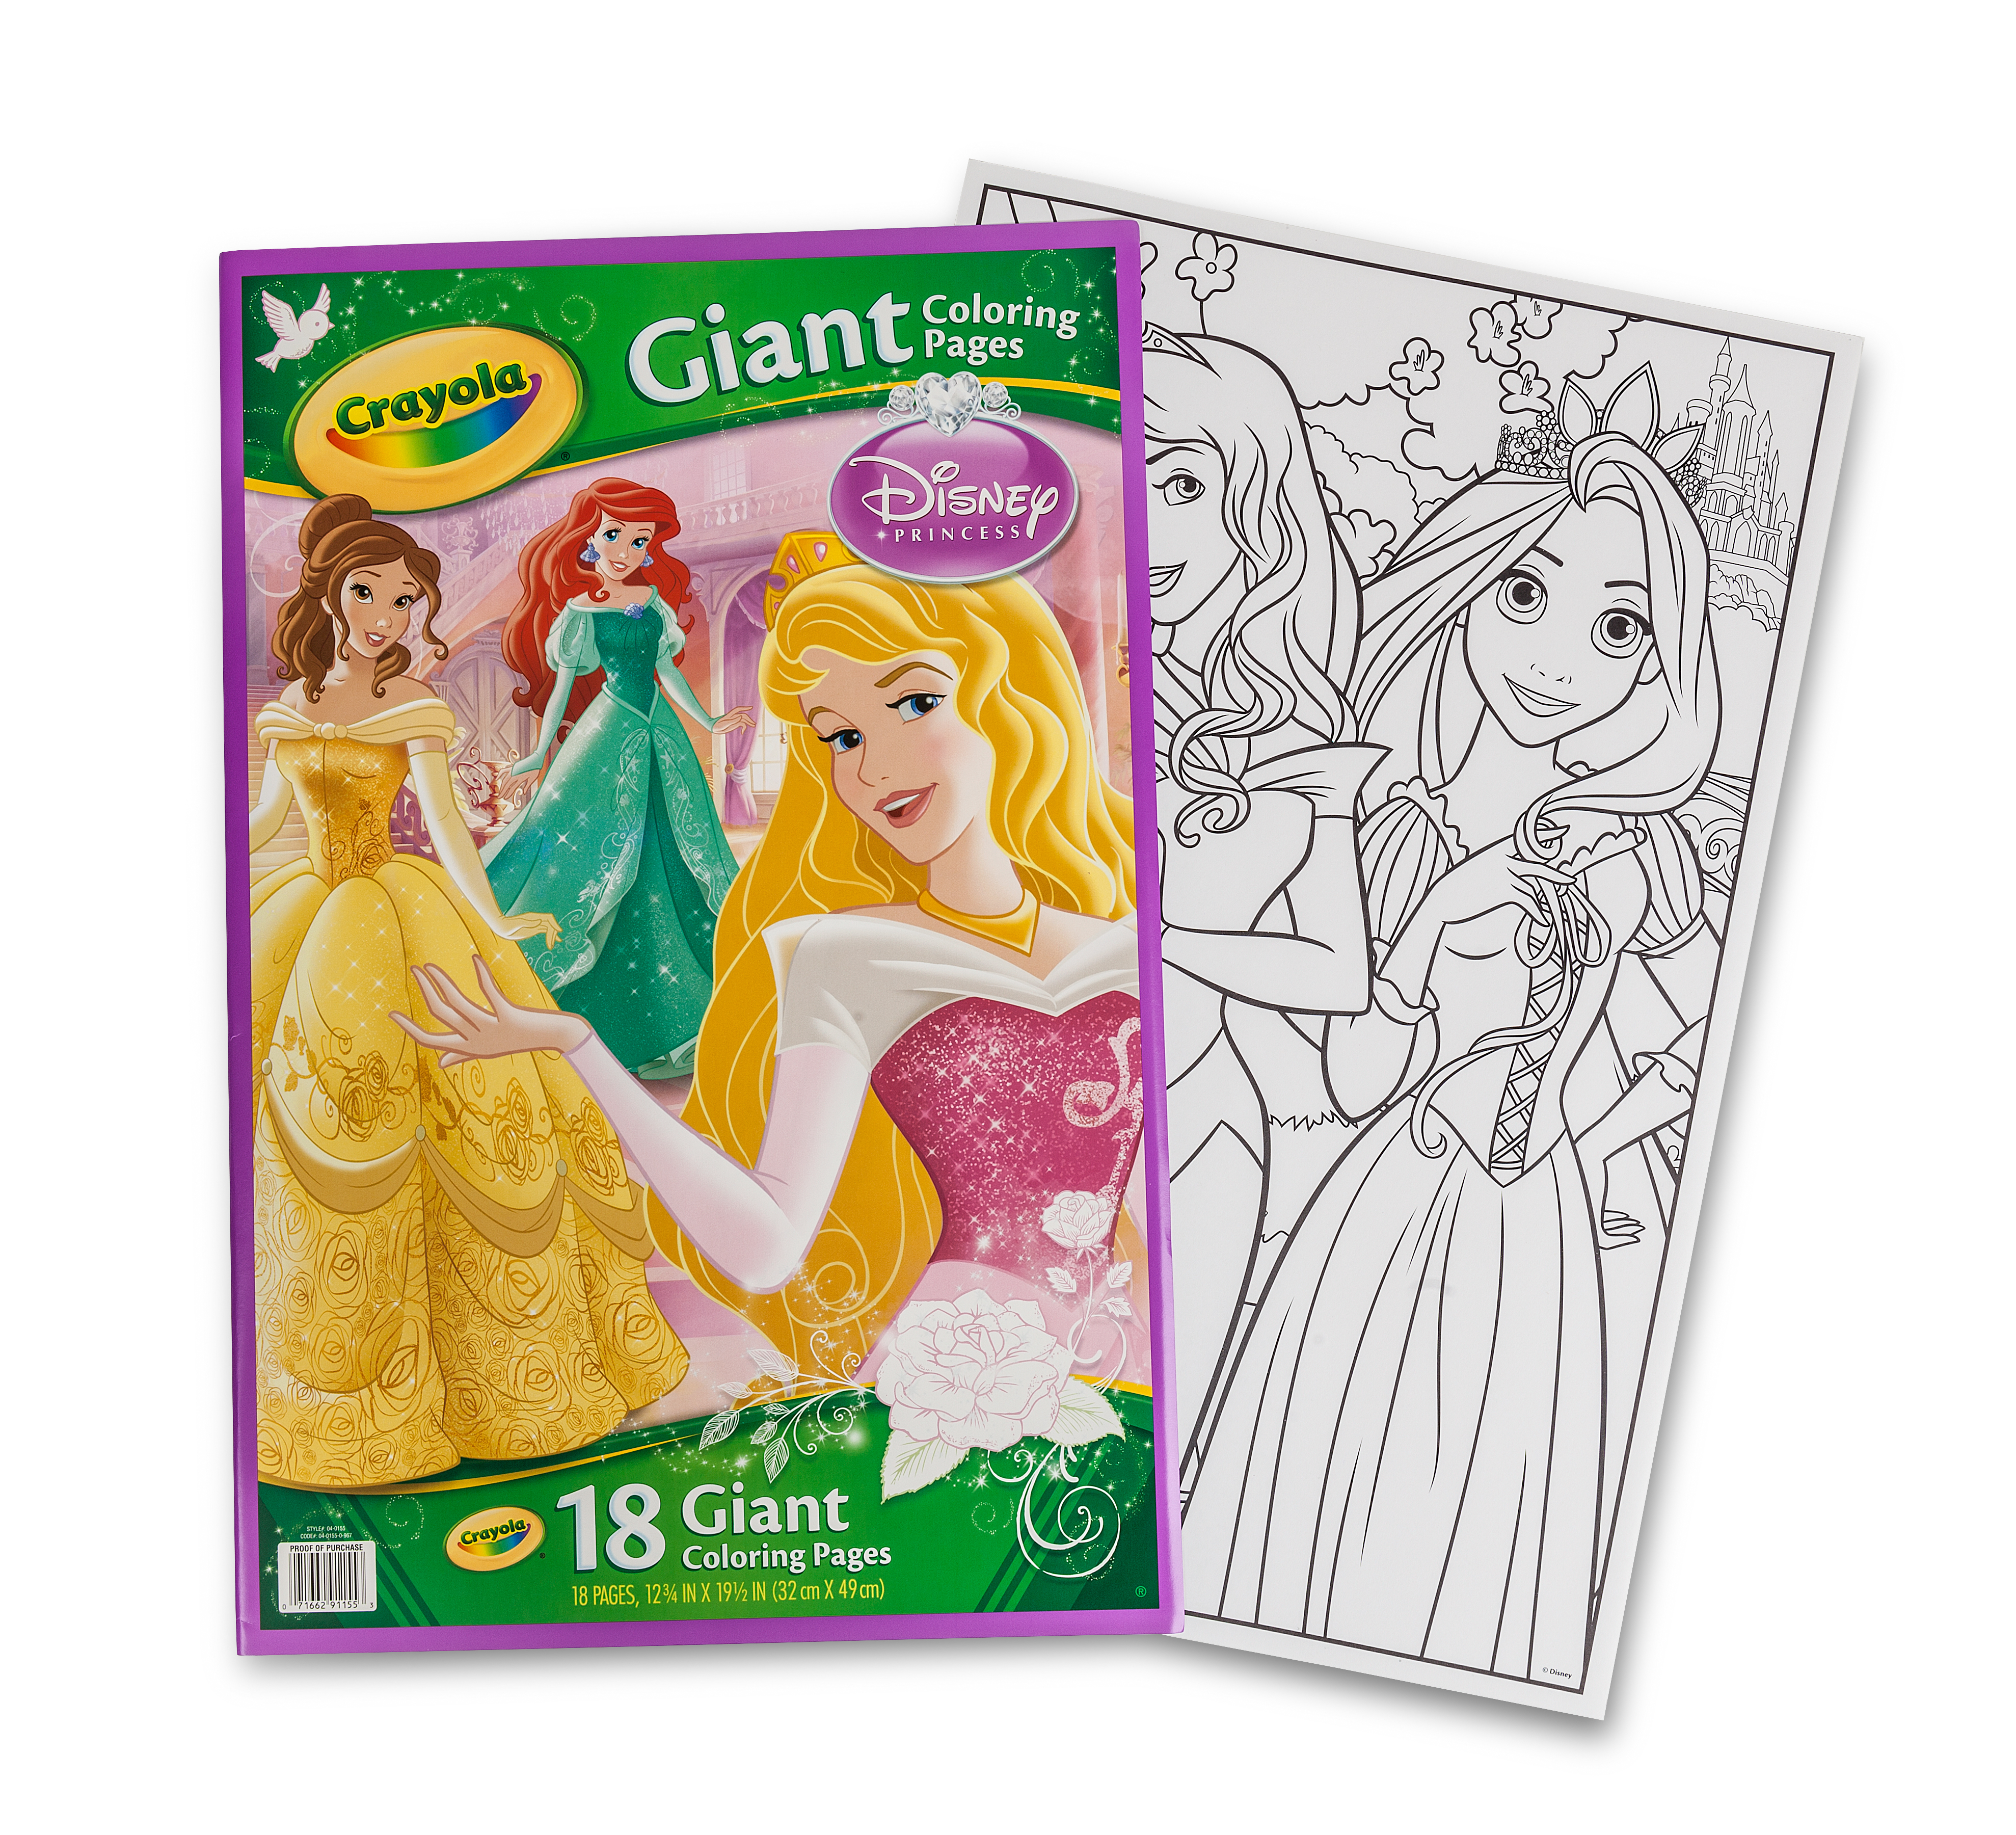 Giant Coloring Pages - Disney Princess | Crayola